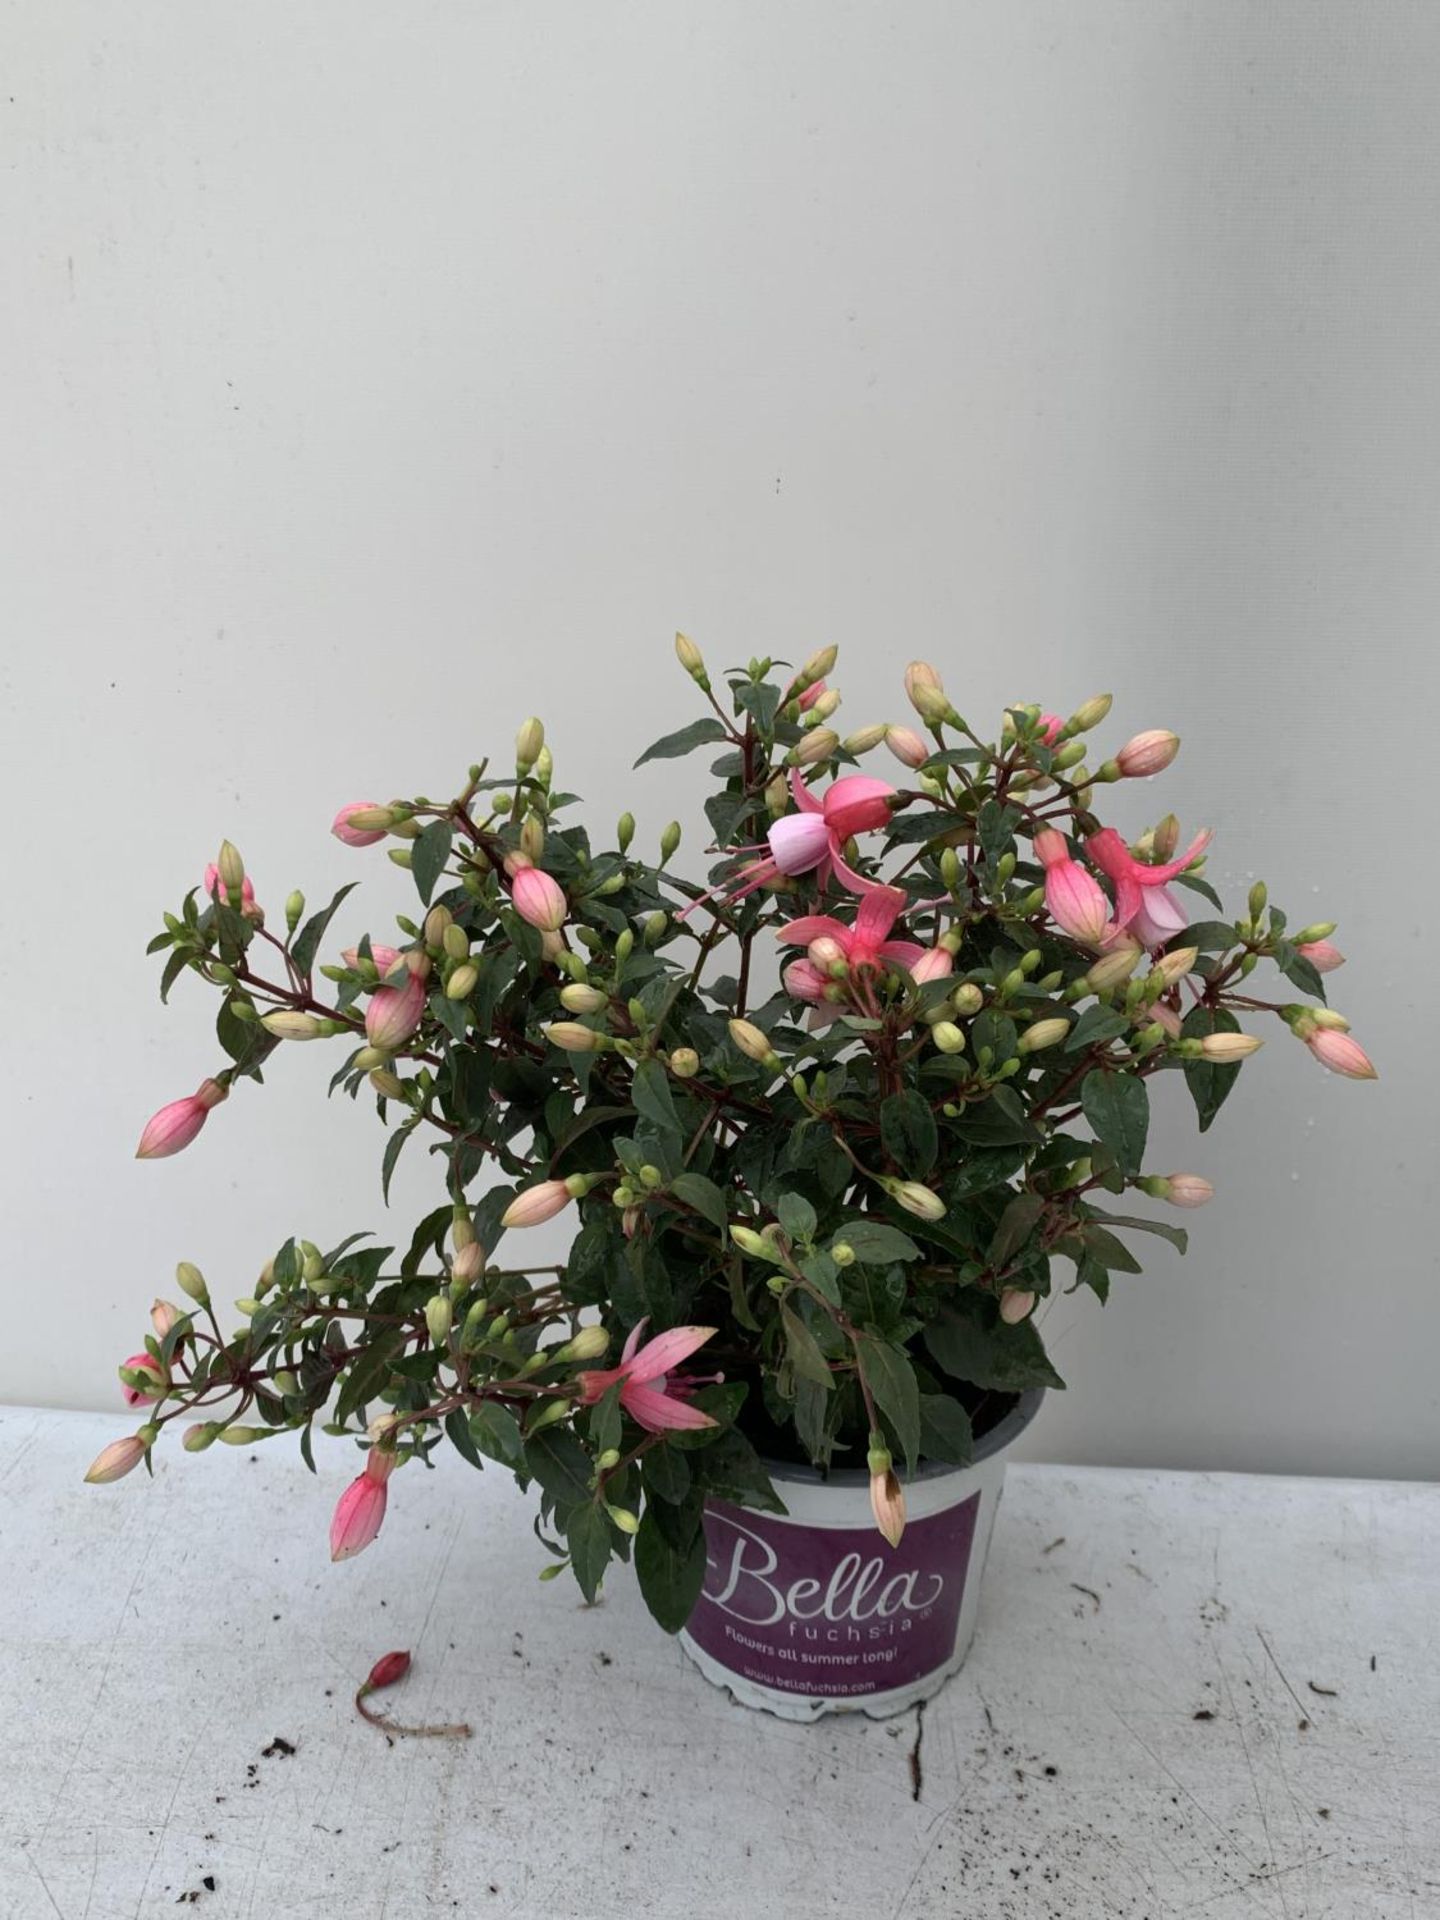 NINE FUCHSIA BELLA IN 20CM POTS 20-30CM TALL TO BE SOLD FOR THE NINE PLUS VAT - Image 2 of 5